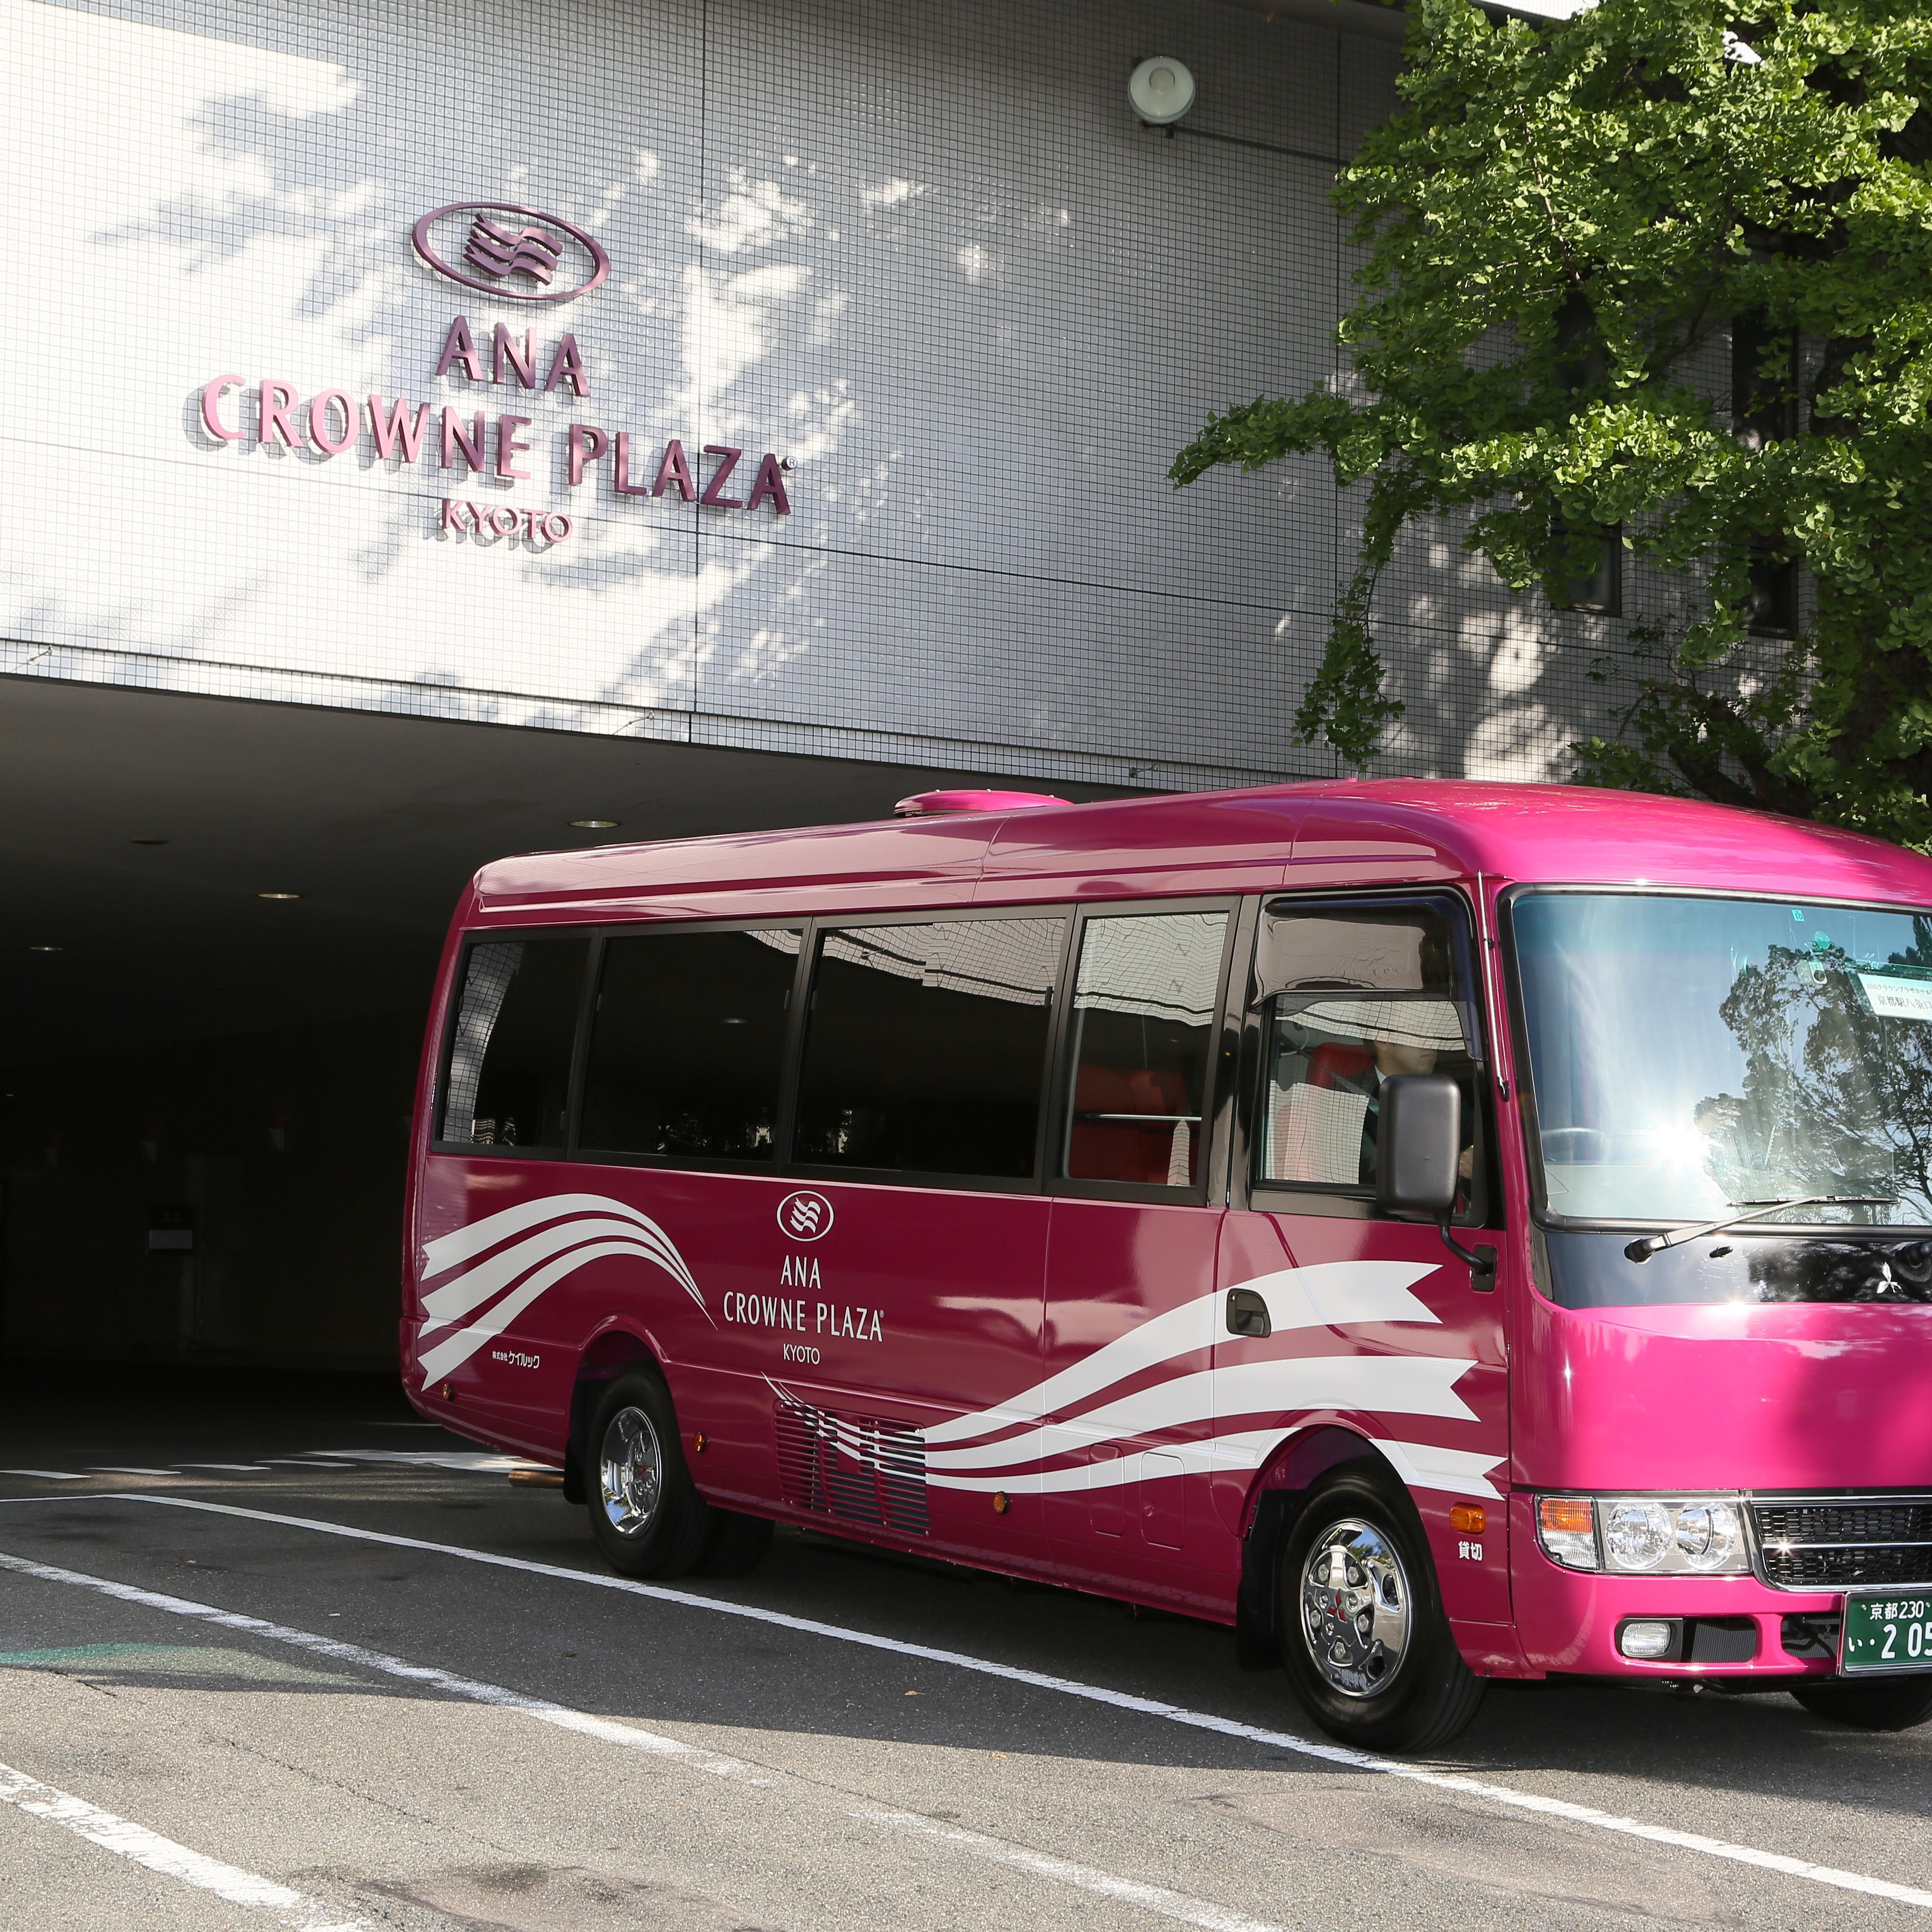 Hotel Shuttle Bus from 8:00AM - 7:45PM (8:50 PM Saturday only)